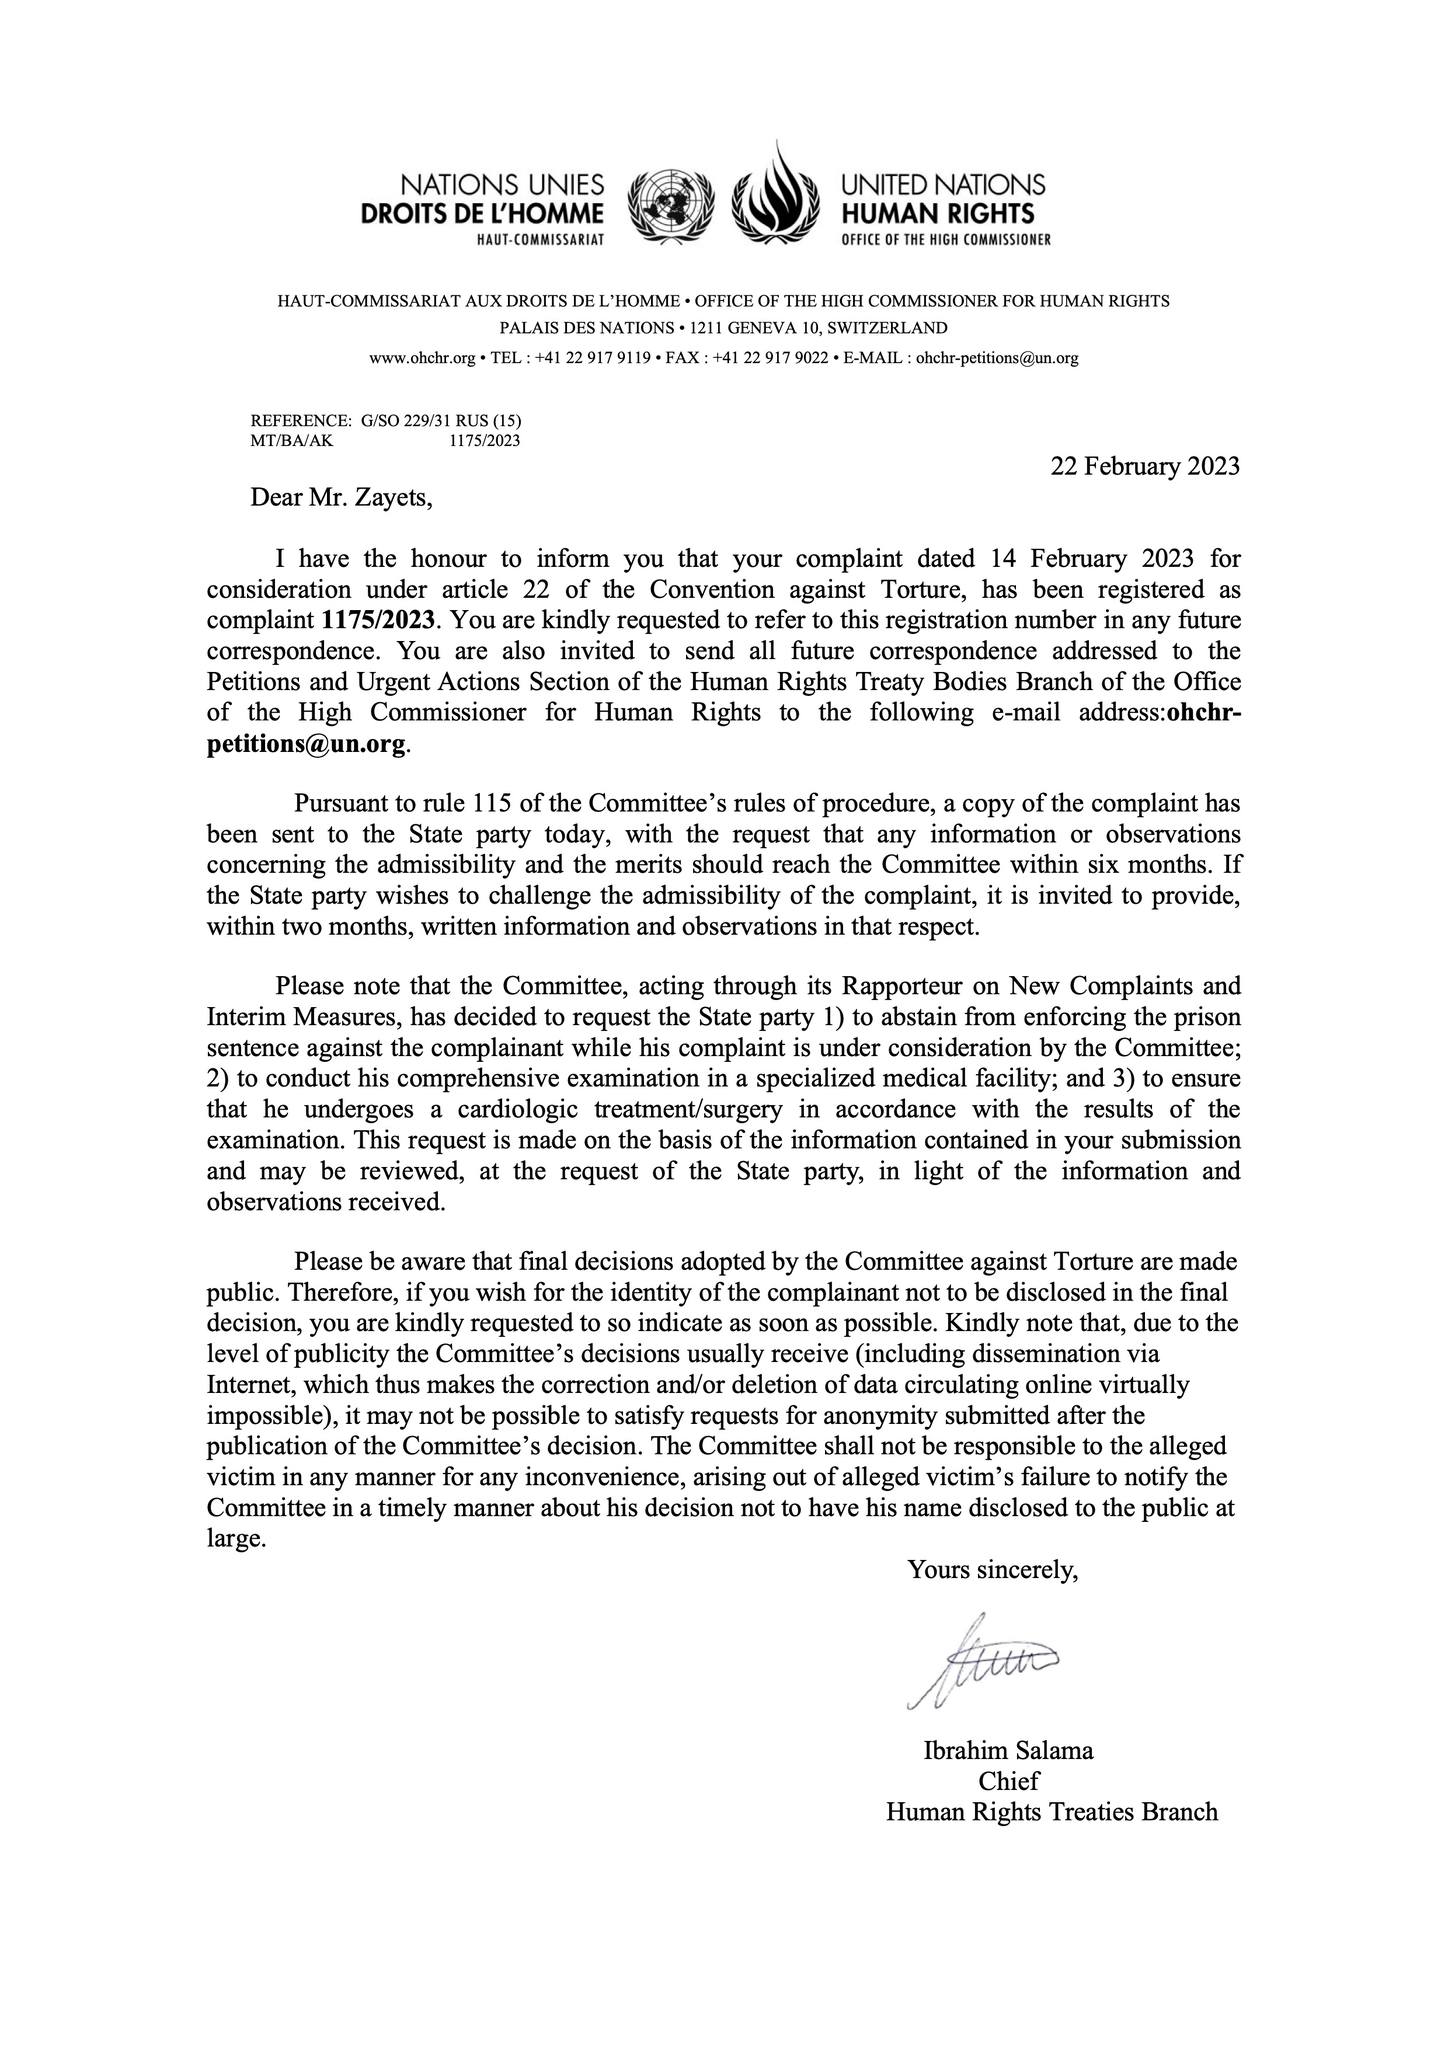 UN Committee letter regarding the complaint lodged by Serhiy Zayets, on behalf of Amet Suleimanov